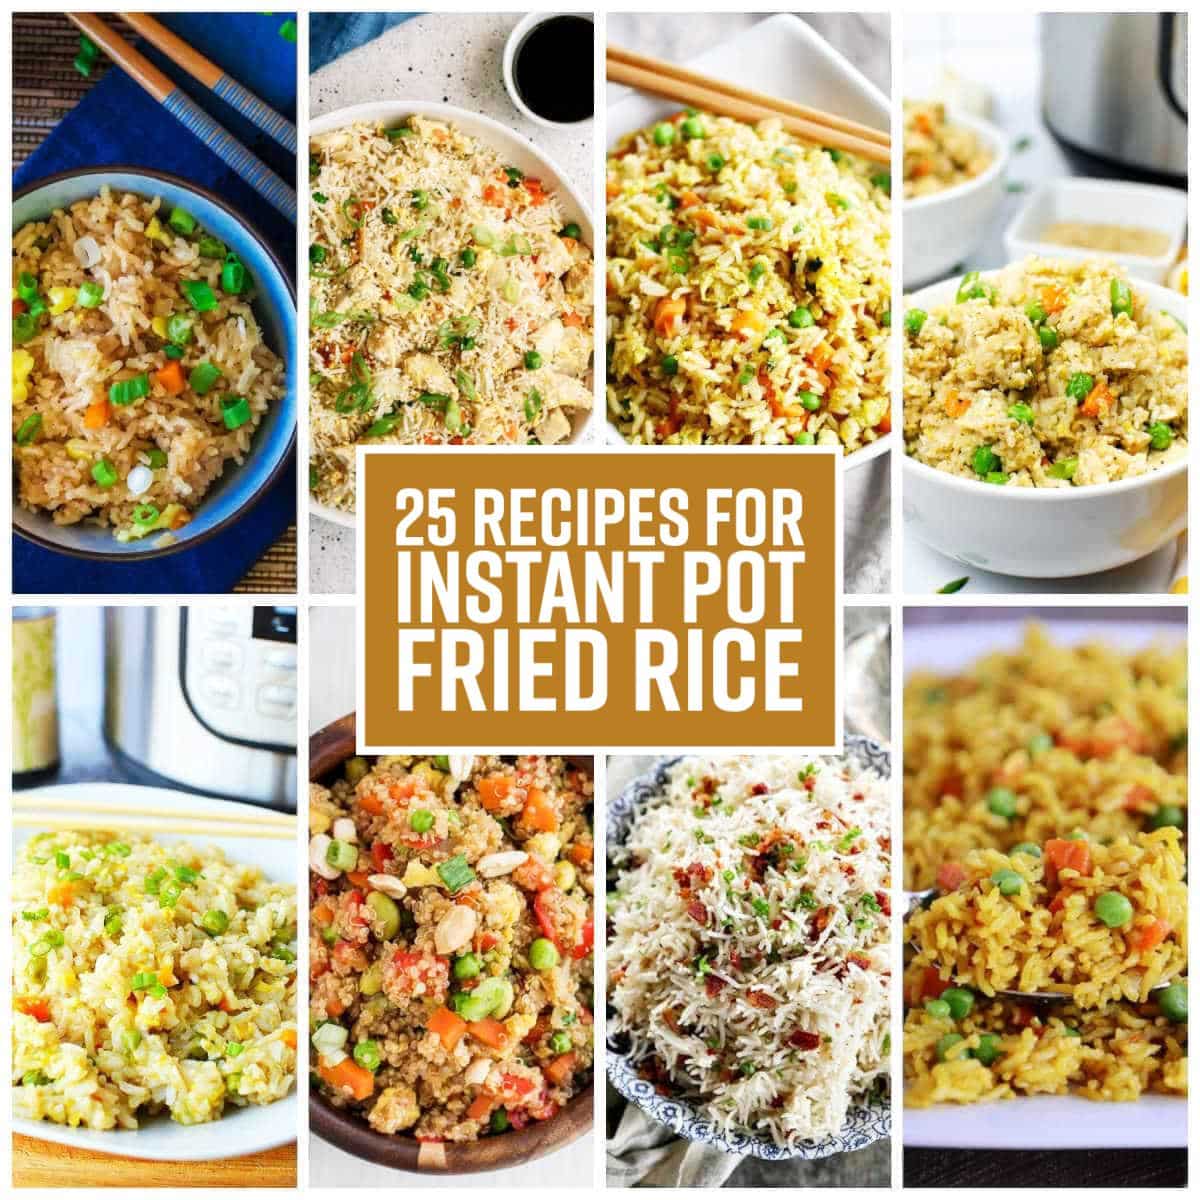 25 Recipes for Instant Pot Fried Rice collage with text overlay showing featured recipes.